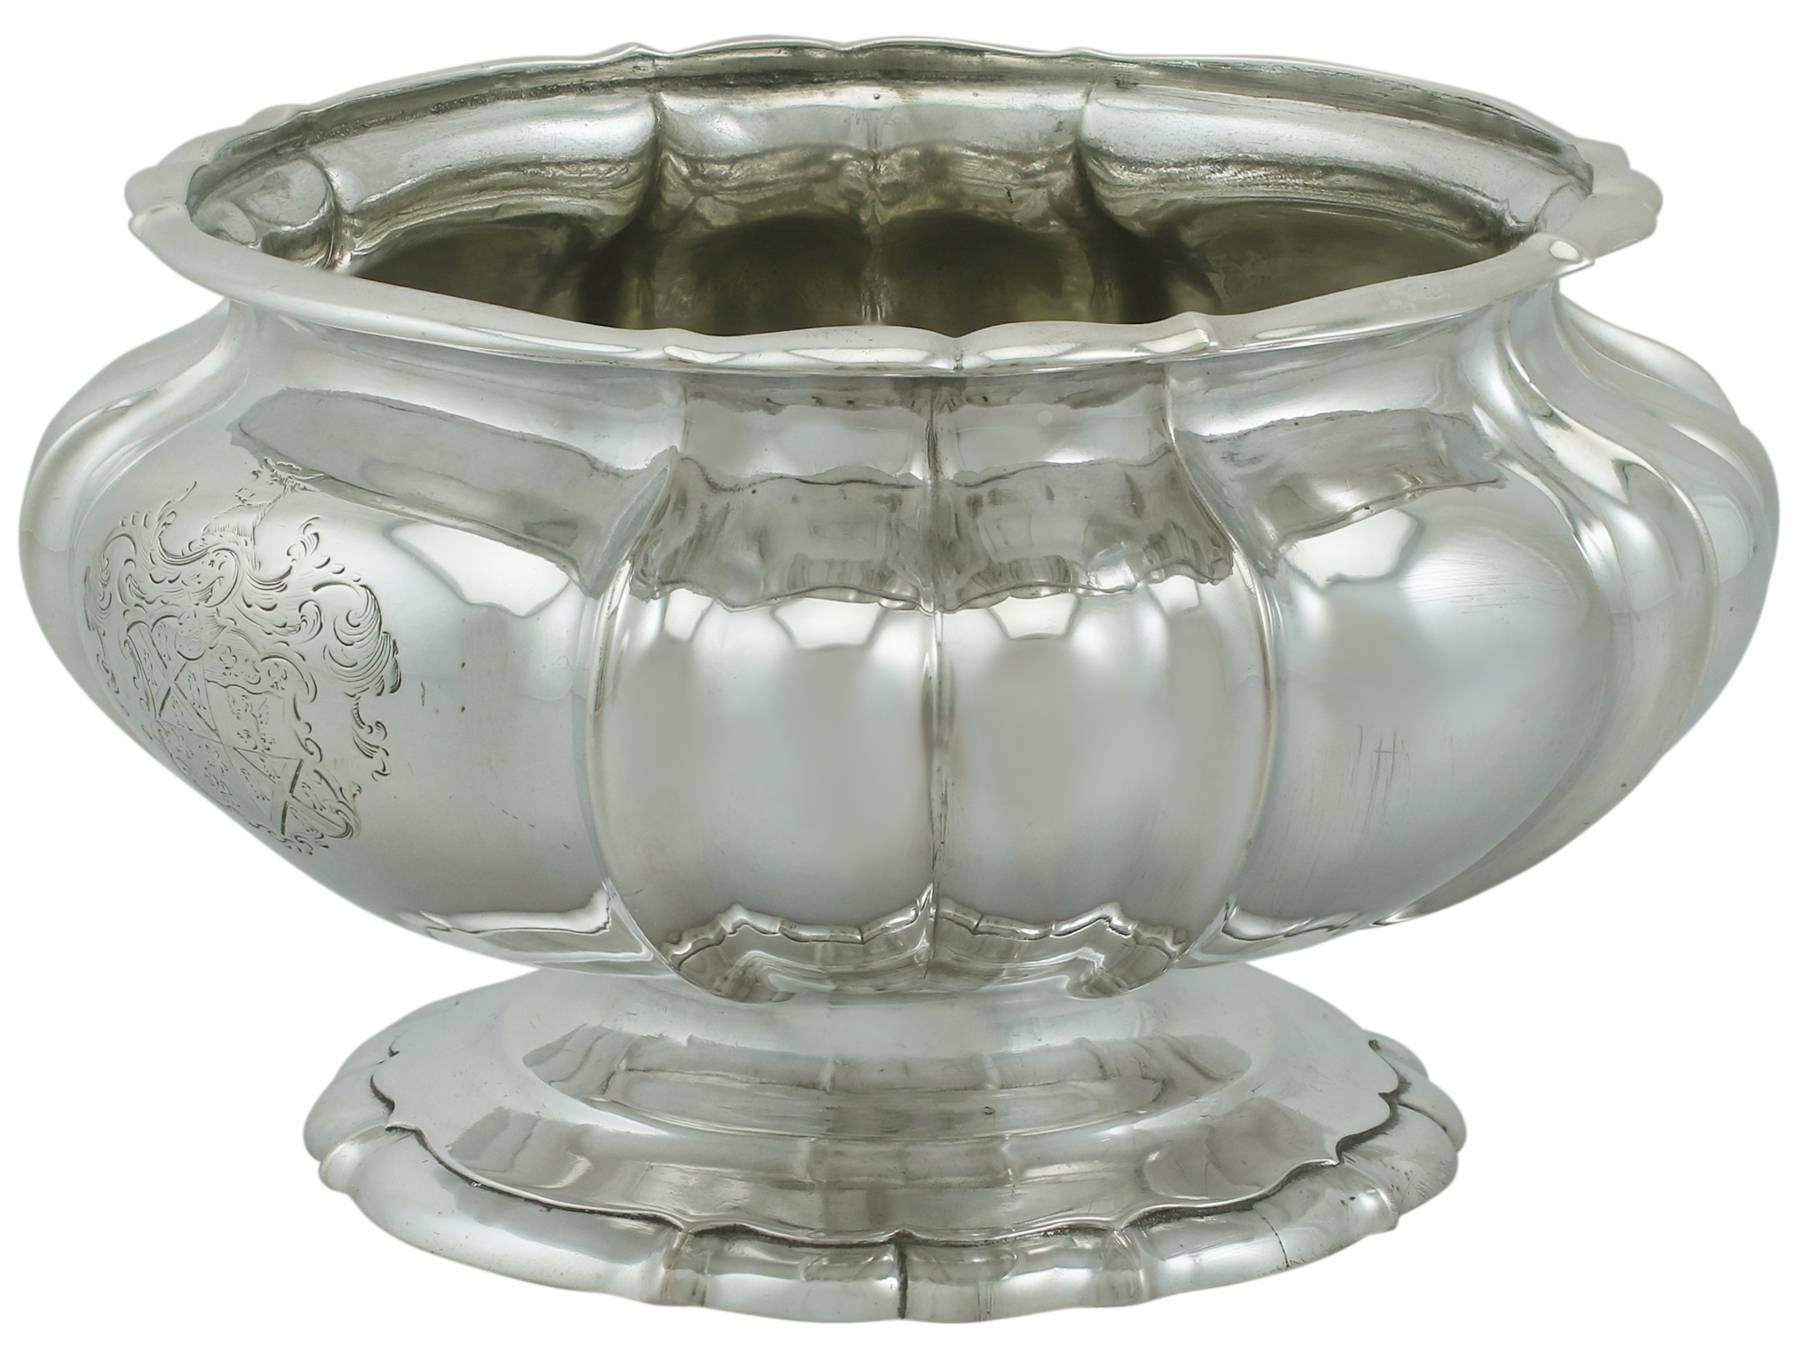 An exceptional, fine and impressive antique George IV English sterling silver bowl made by Paul Storr; an addition to our range of collectable ornamental silverware

This exceptional, antique George IV sterling silver bowl has a circular